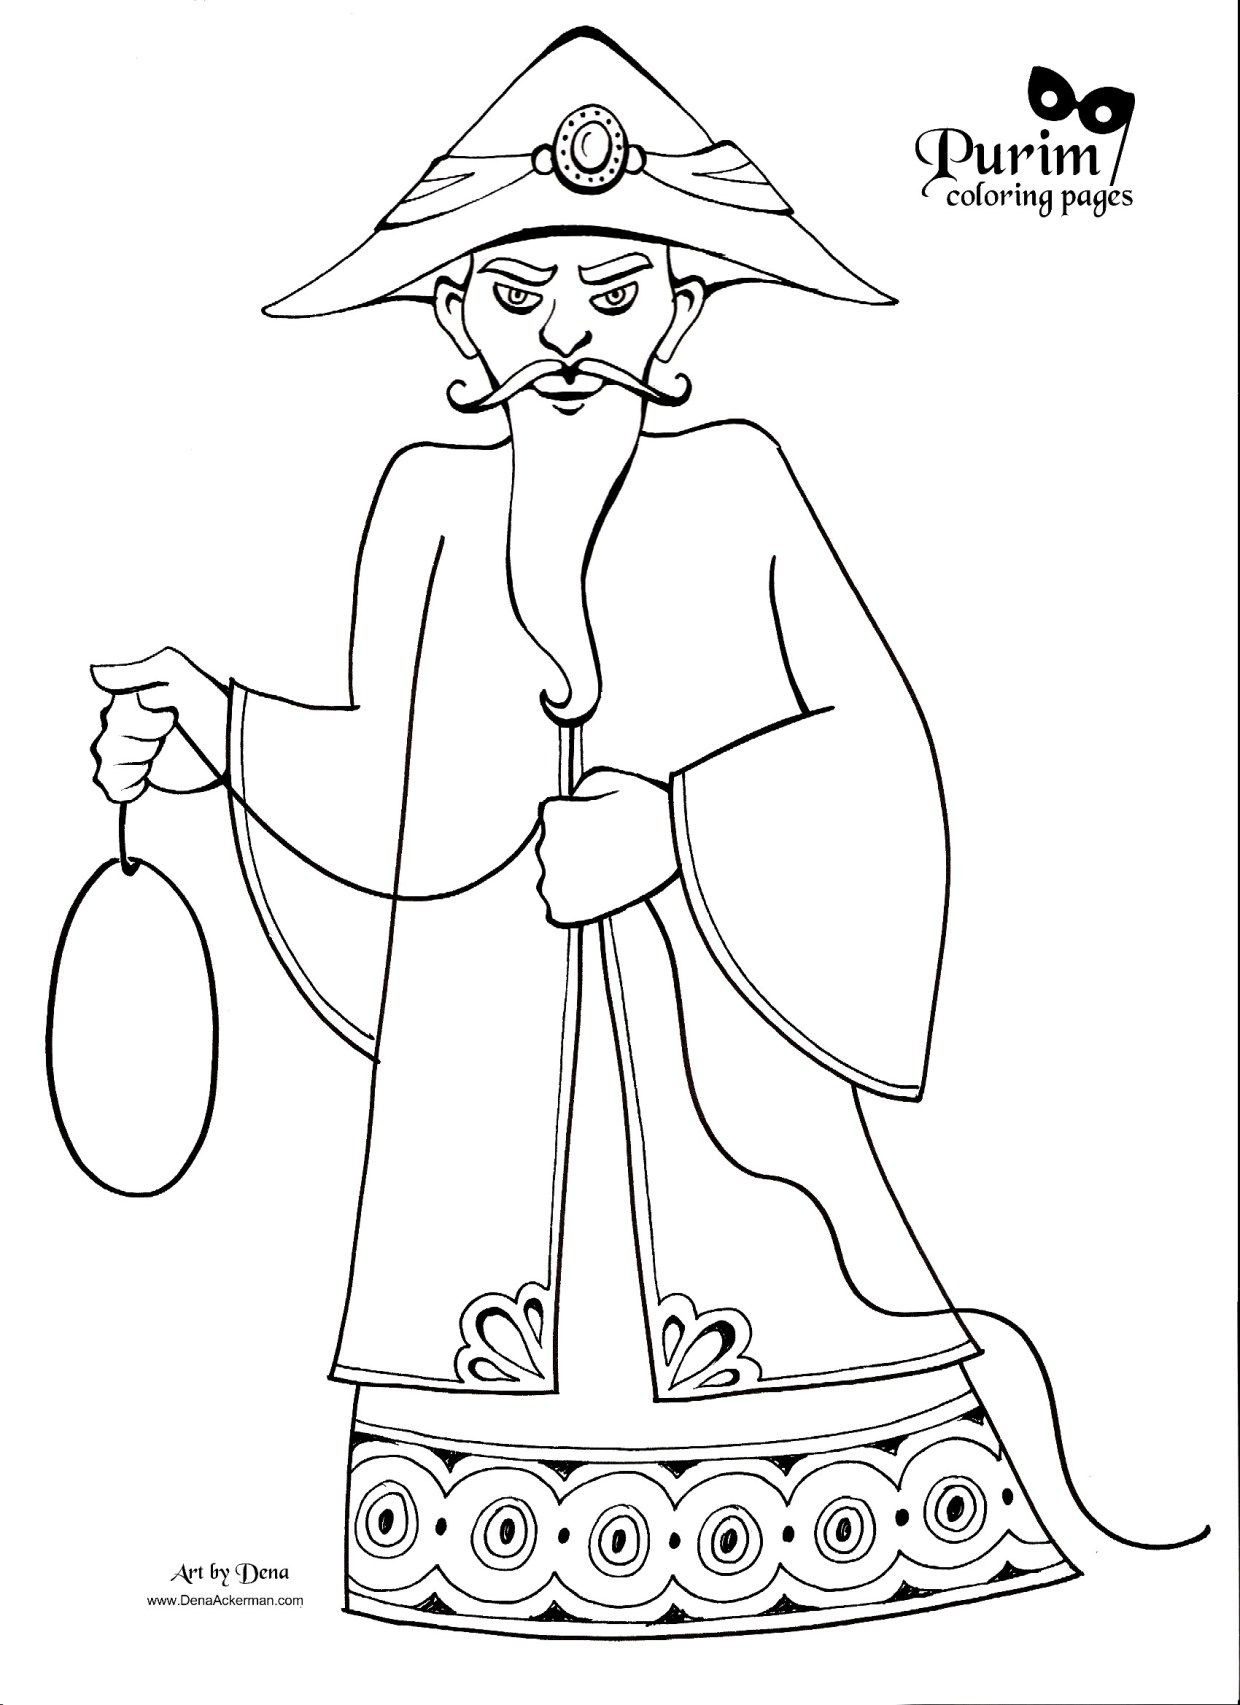 Purim Coloring Page Purim 19 Purim Coloring Page Lrcp Coloring Page